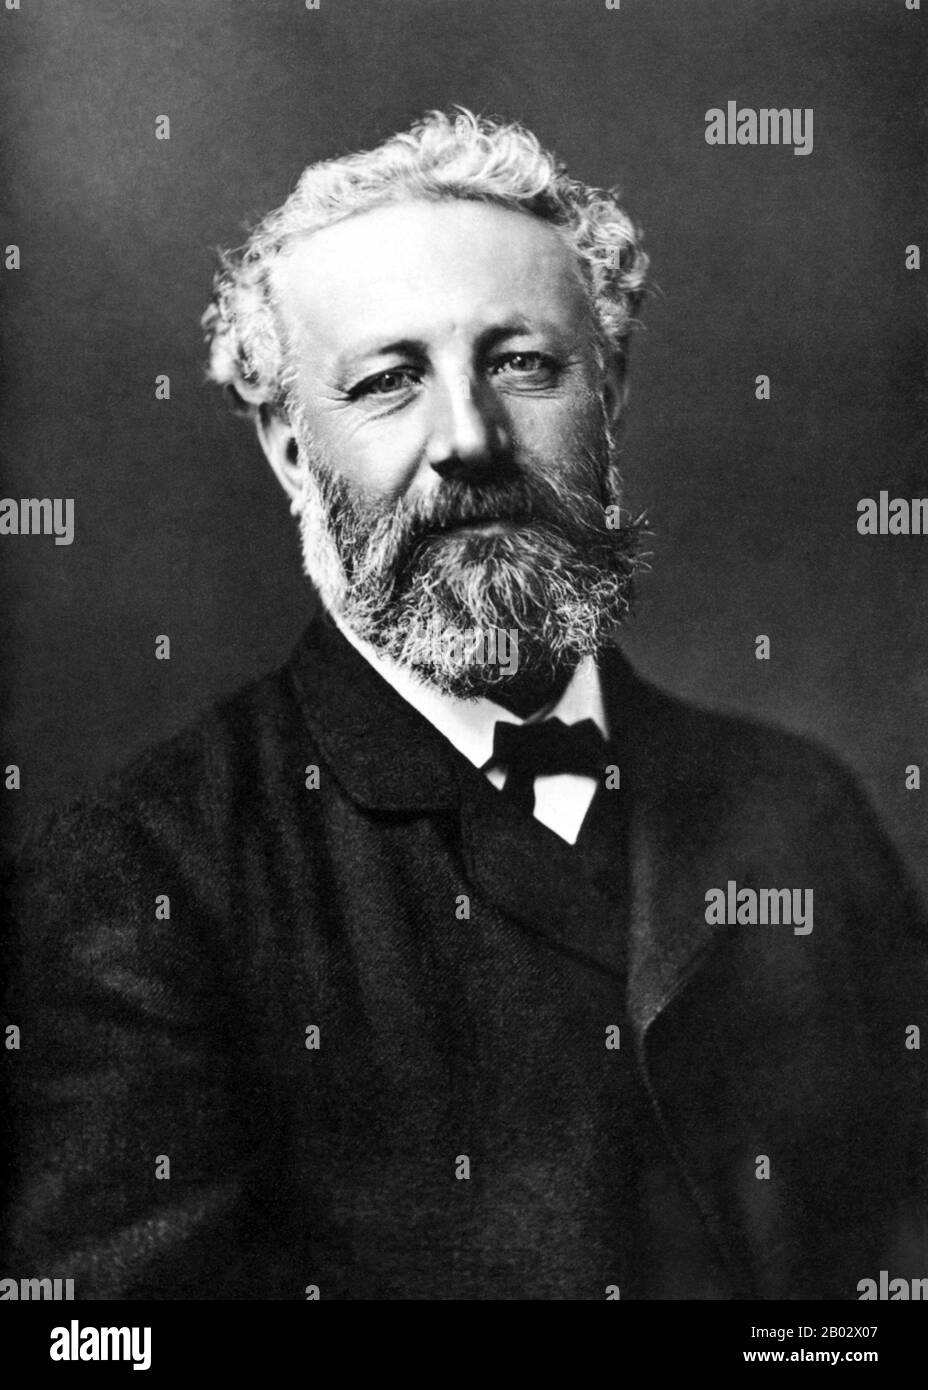 Jules Gabriel Verne (8 February 1828 – 24 March 1905) was a French novelist, poet, and playwright best known for his adventure novels and his profound influence on the literary genre of science fiction.  Verne was born to bourgeois parents in the seaport of Nantes, where he was trained to follow in his father's footsteps as a lawyer, but quit the profession early in life to write for magazines and the stage. His collaboration with the publisher Pierre-Jules Hetzel led to the creation of the Voyages Extraordinaires, a widely popular series of scrupulously researched adventure novels including J Stock Photo